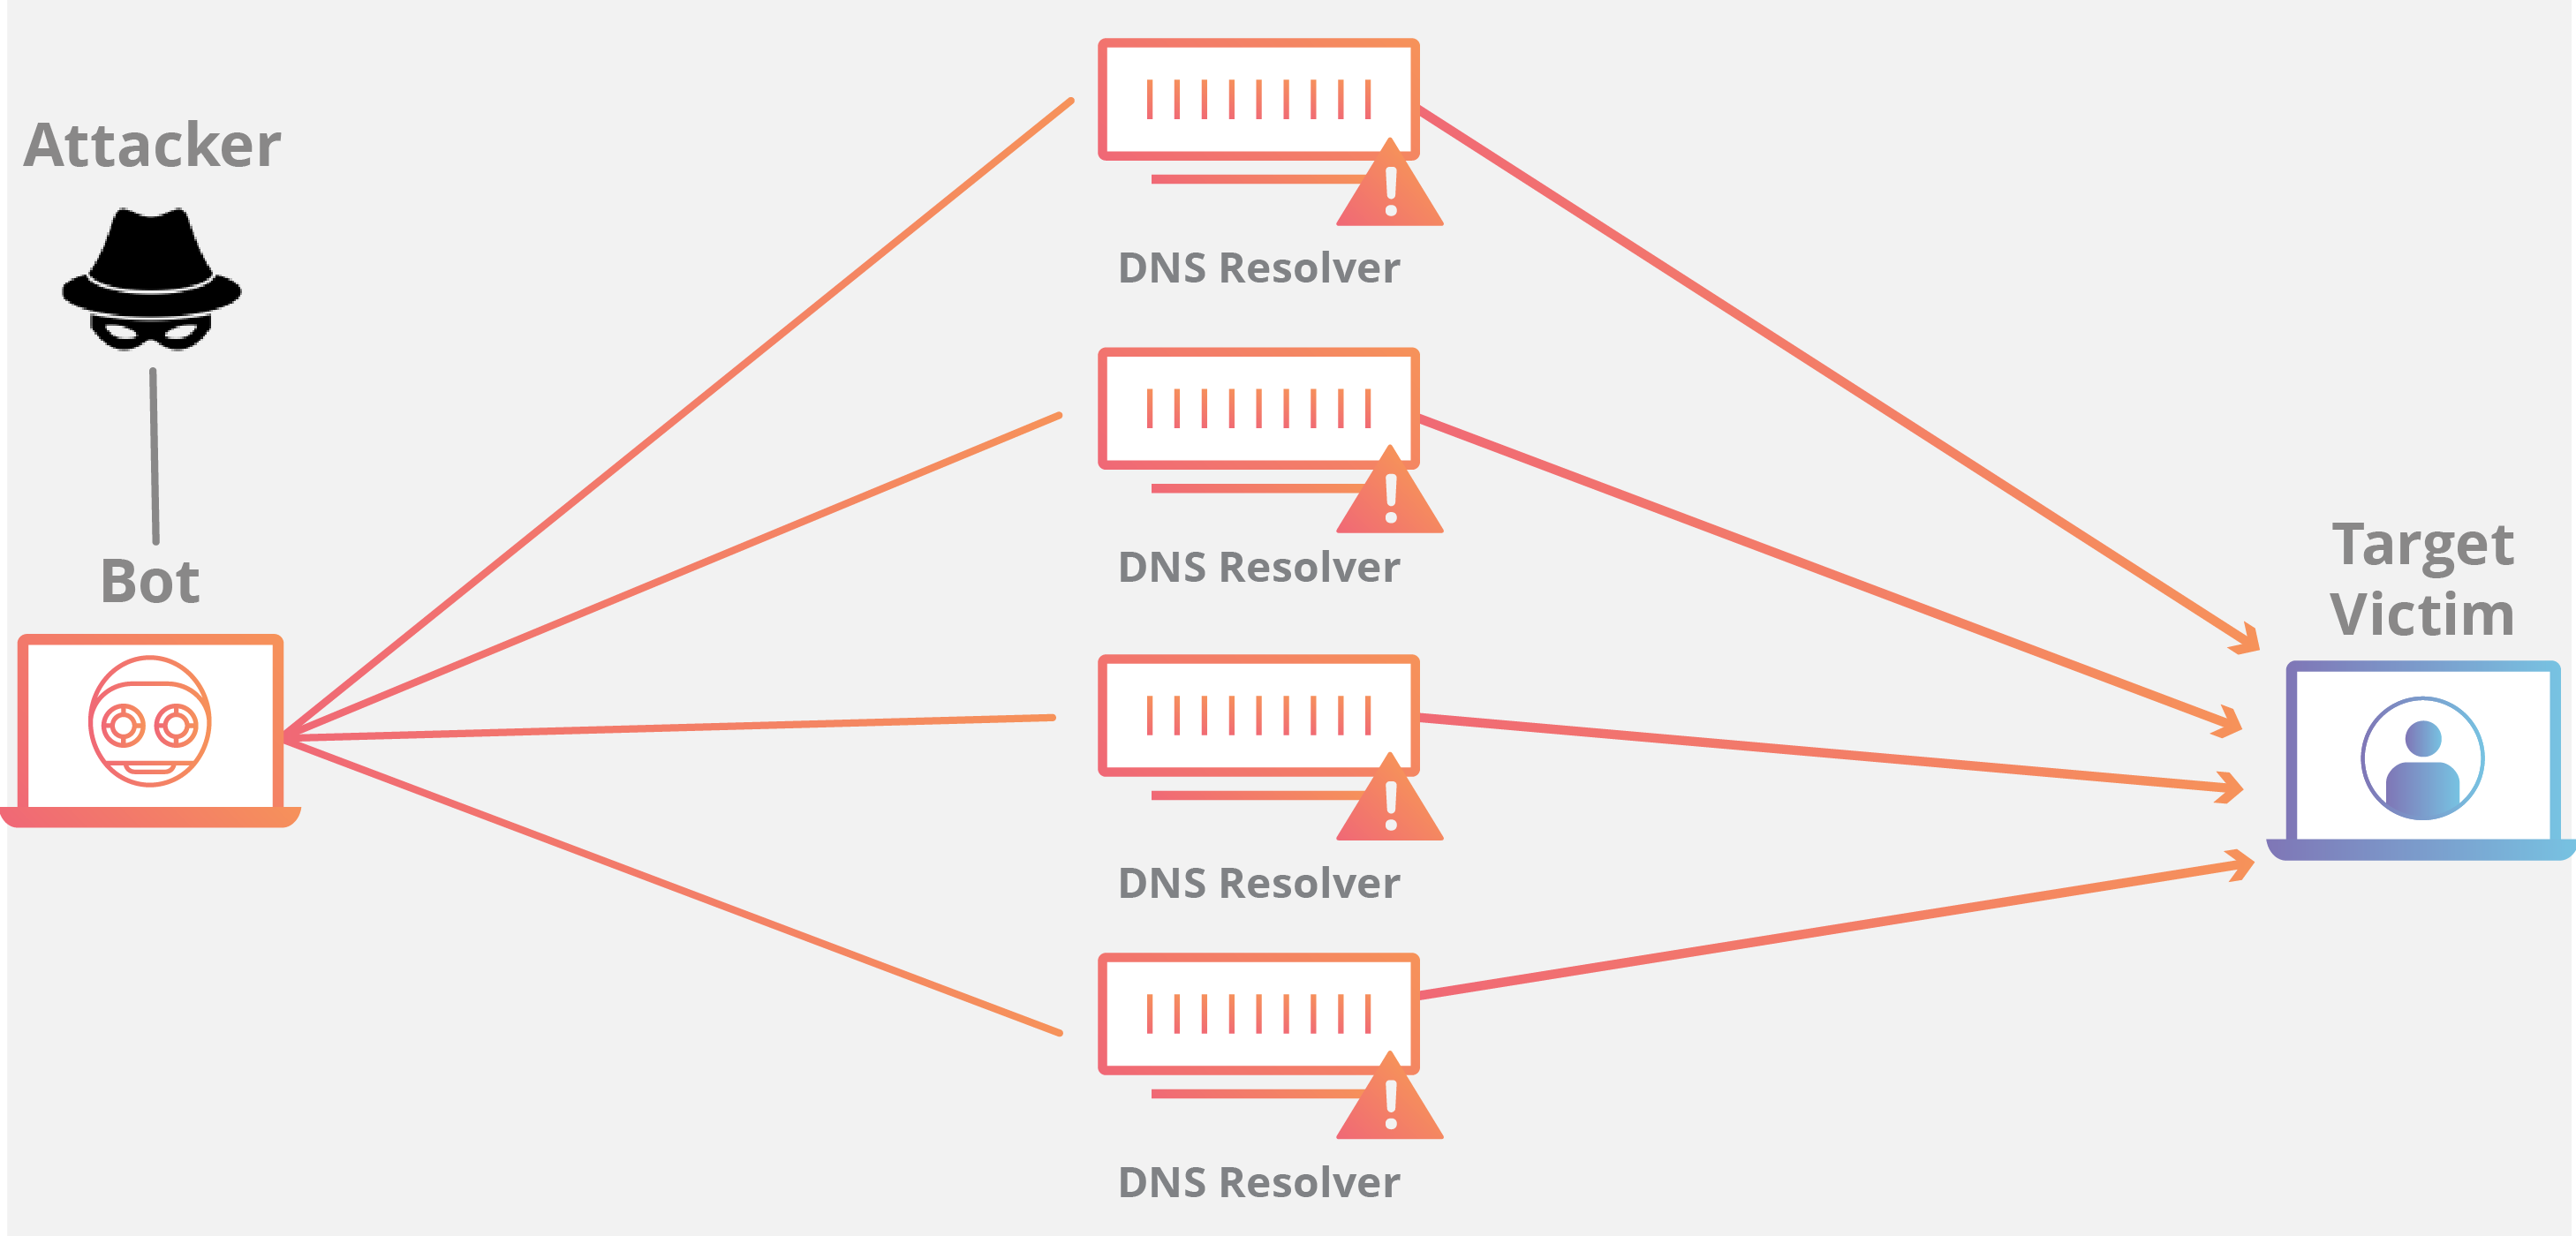 What Is a Distributed Denial-of-Service (DDoS) Attack? | Cloudflare